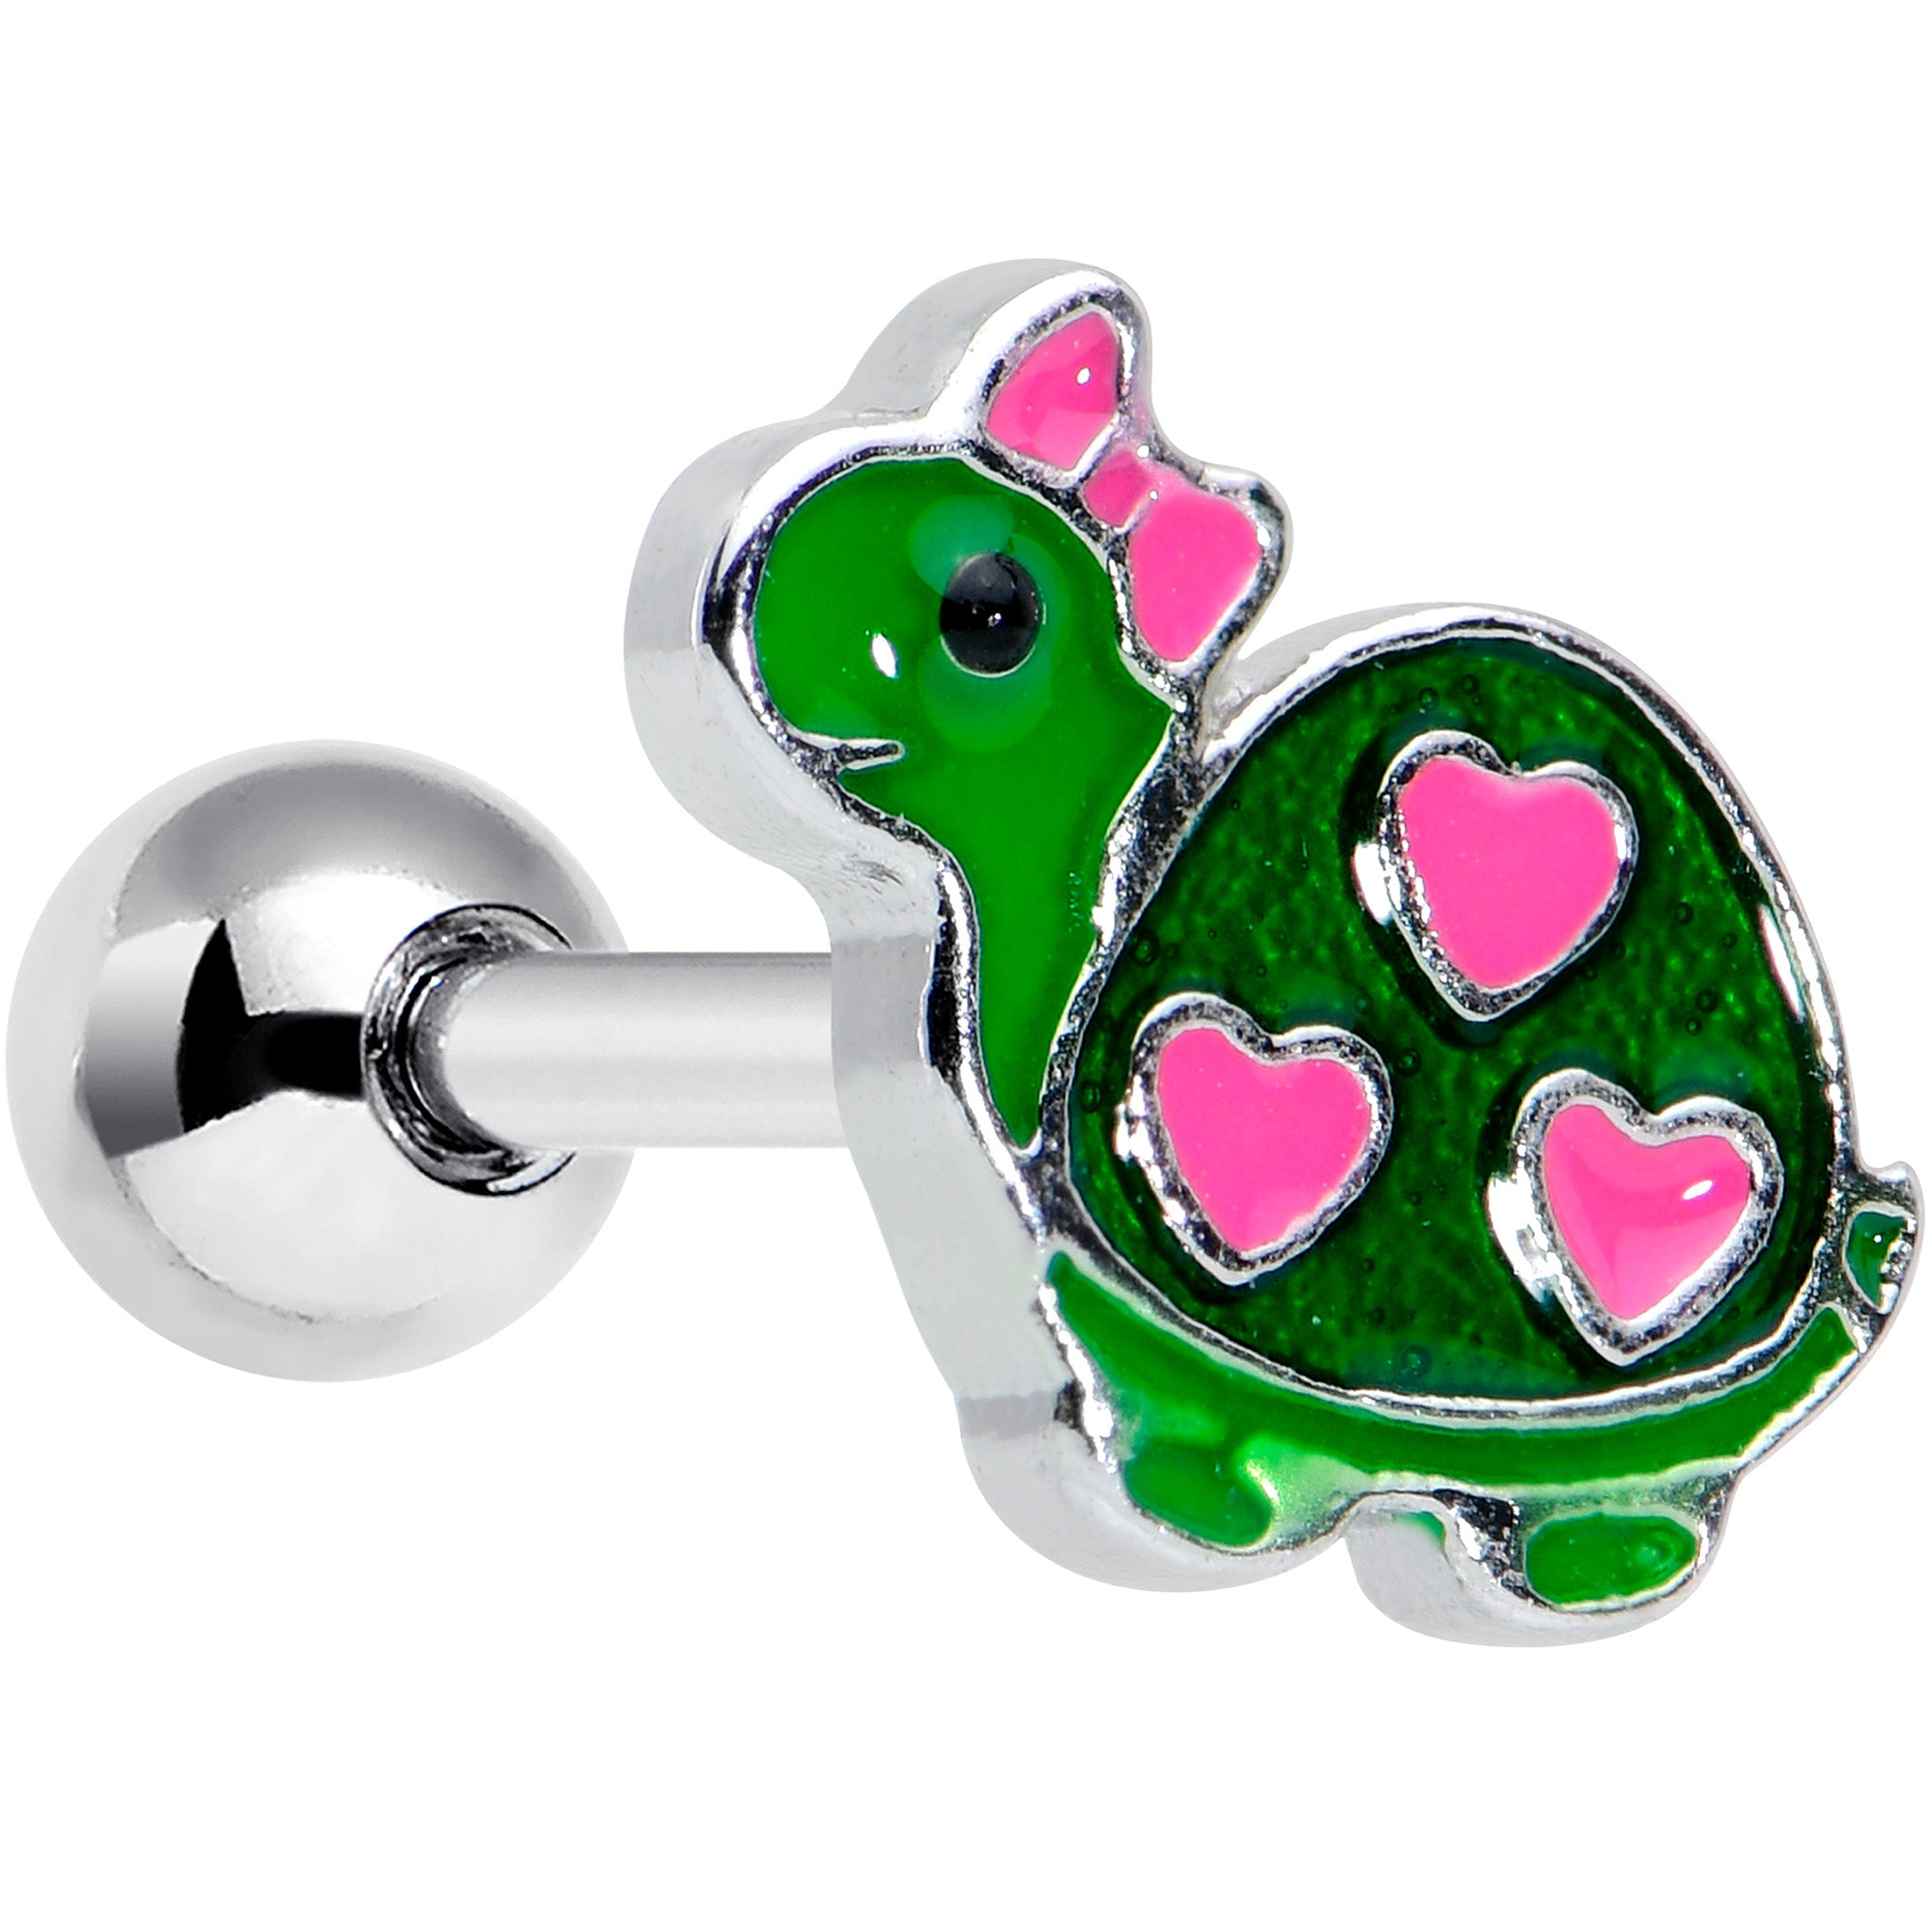 16 Gauge 1/4 Pink Hearts Bow Green Turtle Cartilage Tragus Earring